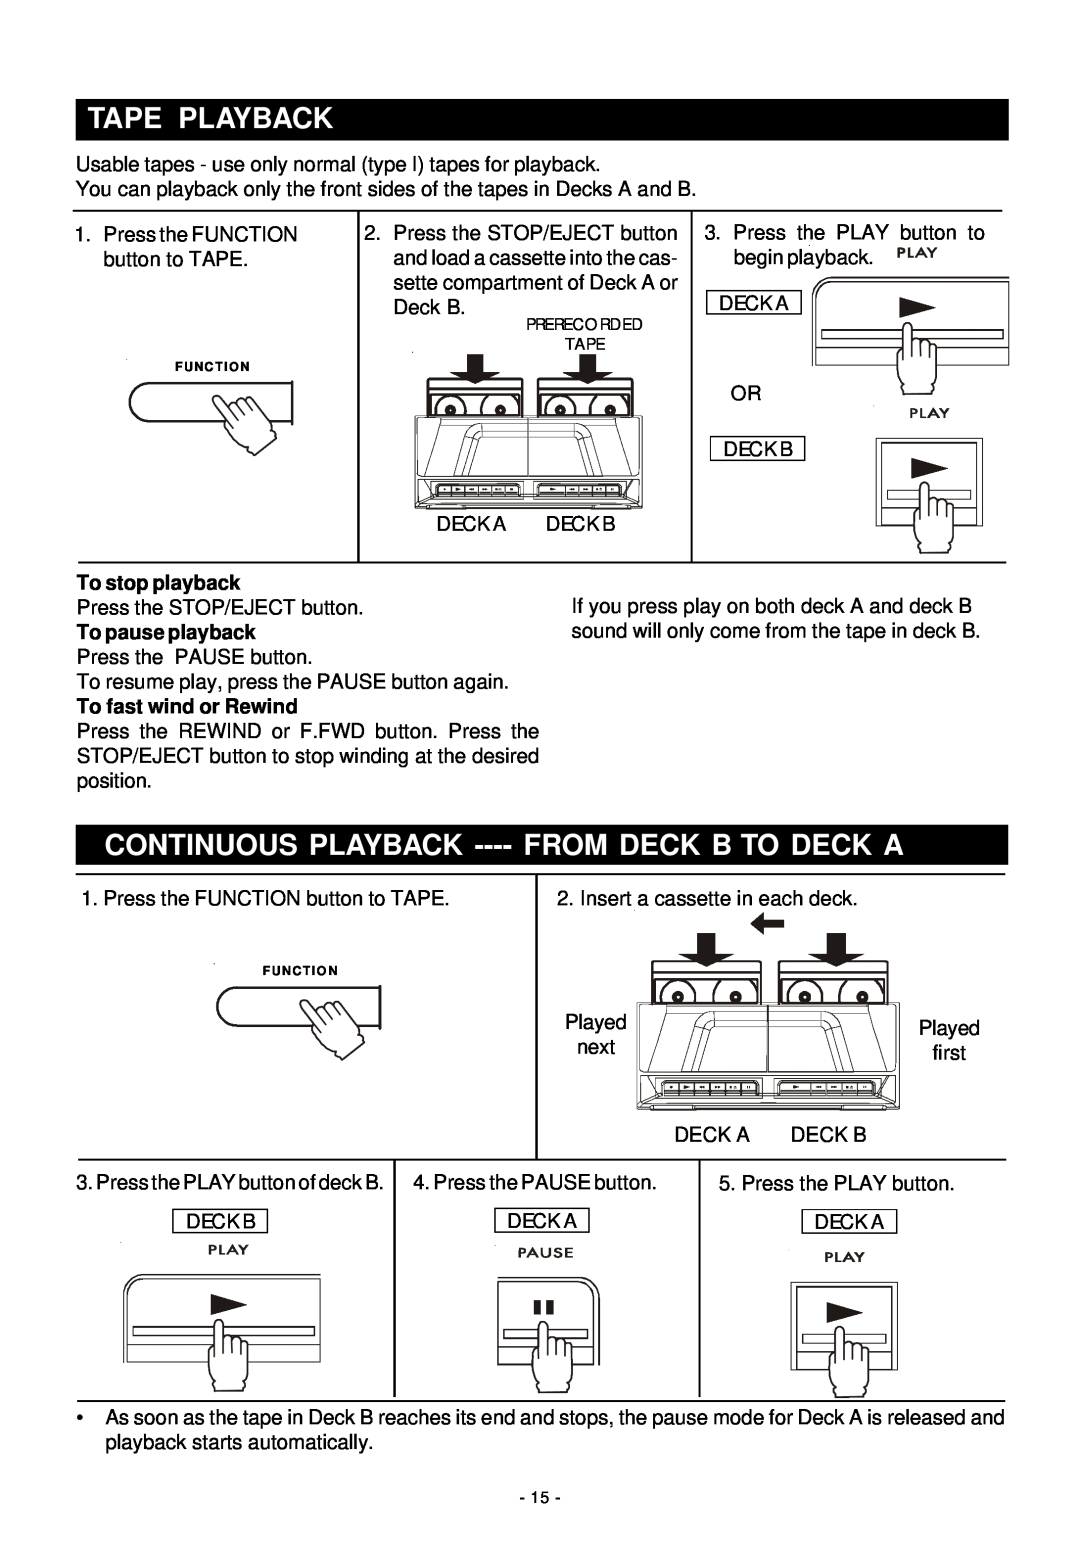 HiFi Works 811-TK5M91-031 instruction manual Tape Playback, Continuous Playback ----From Deck B To Deck A, To stop playback 